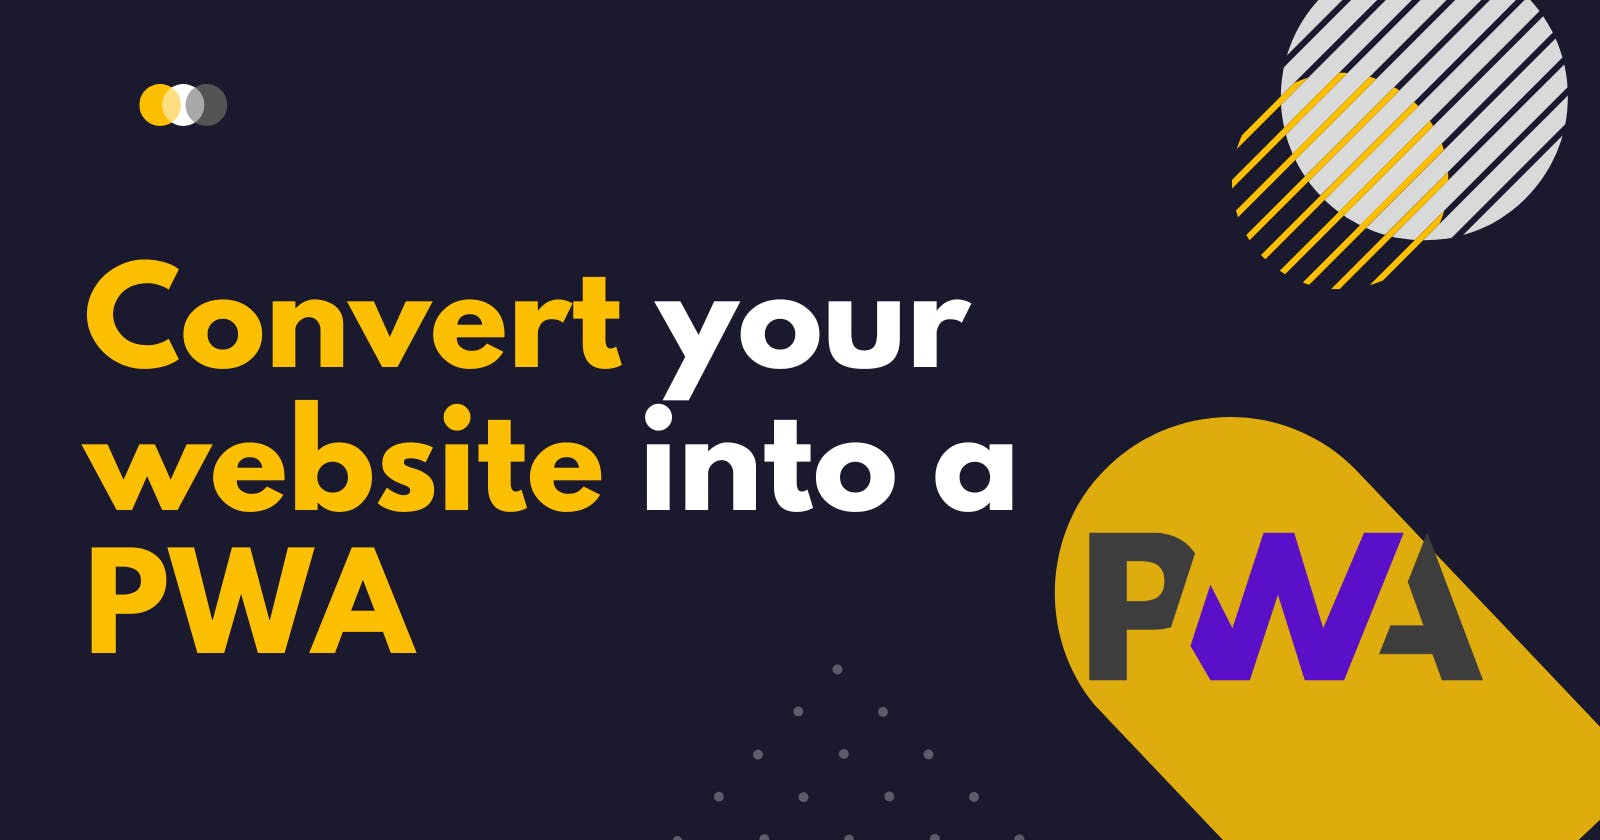 Convert your website into a PWA